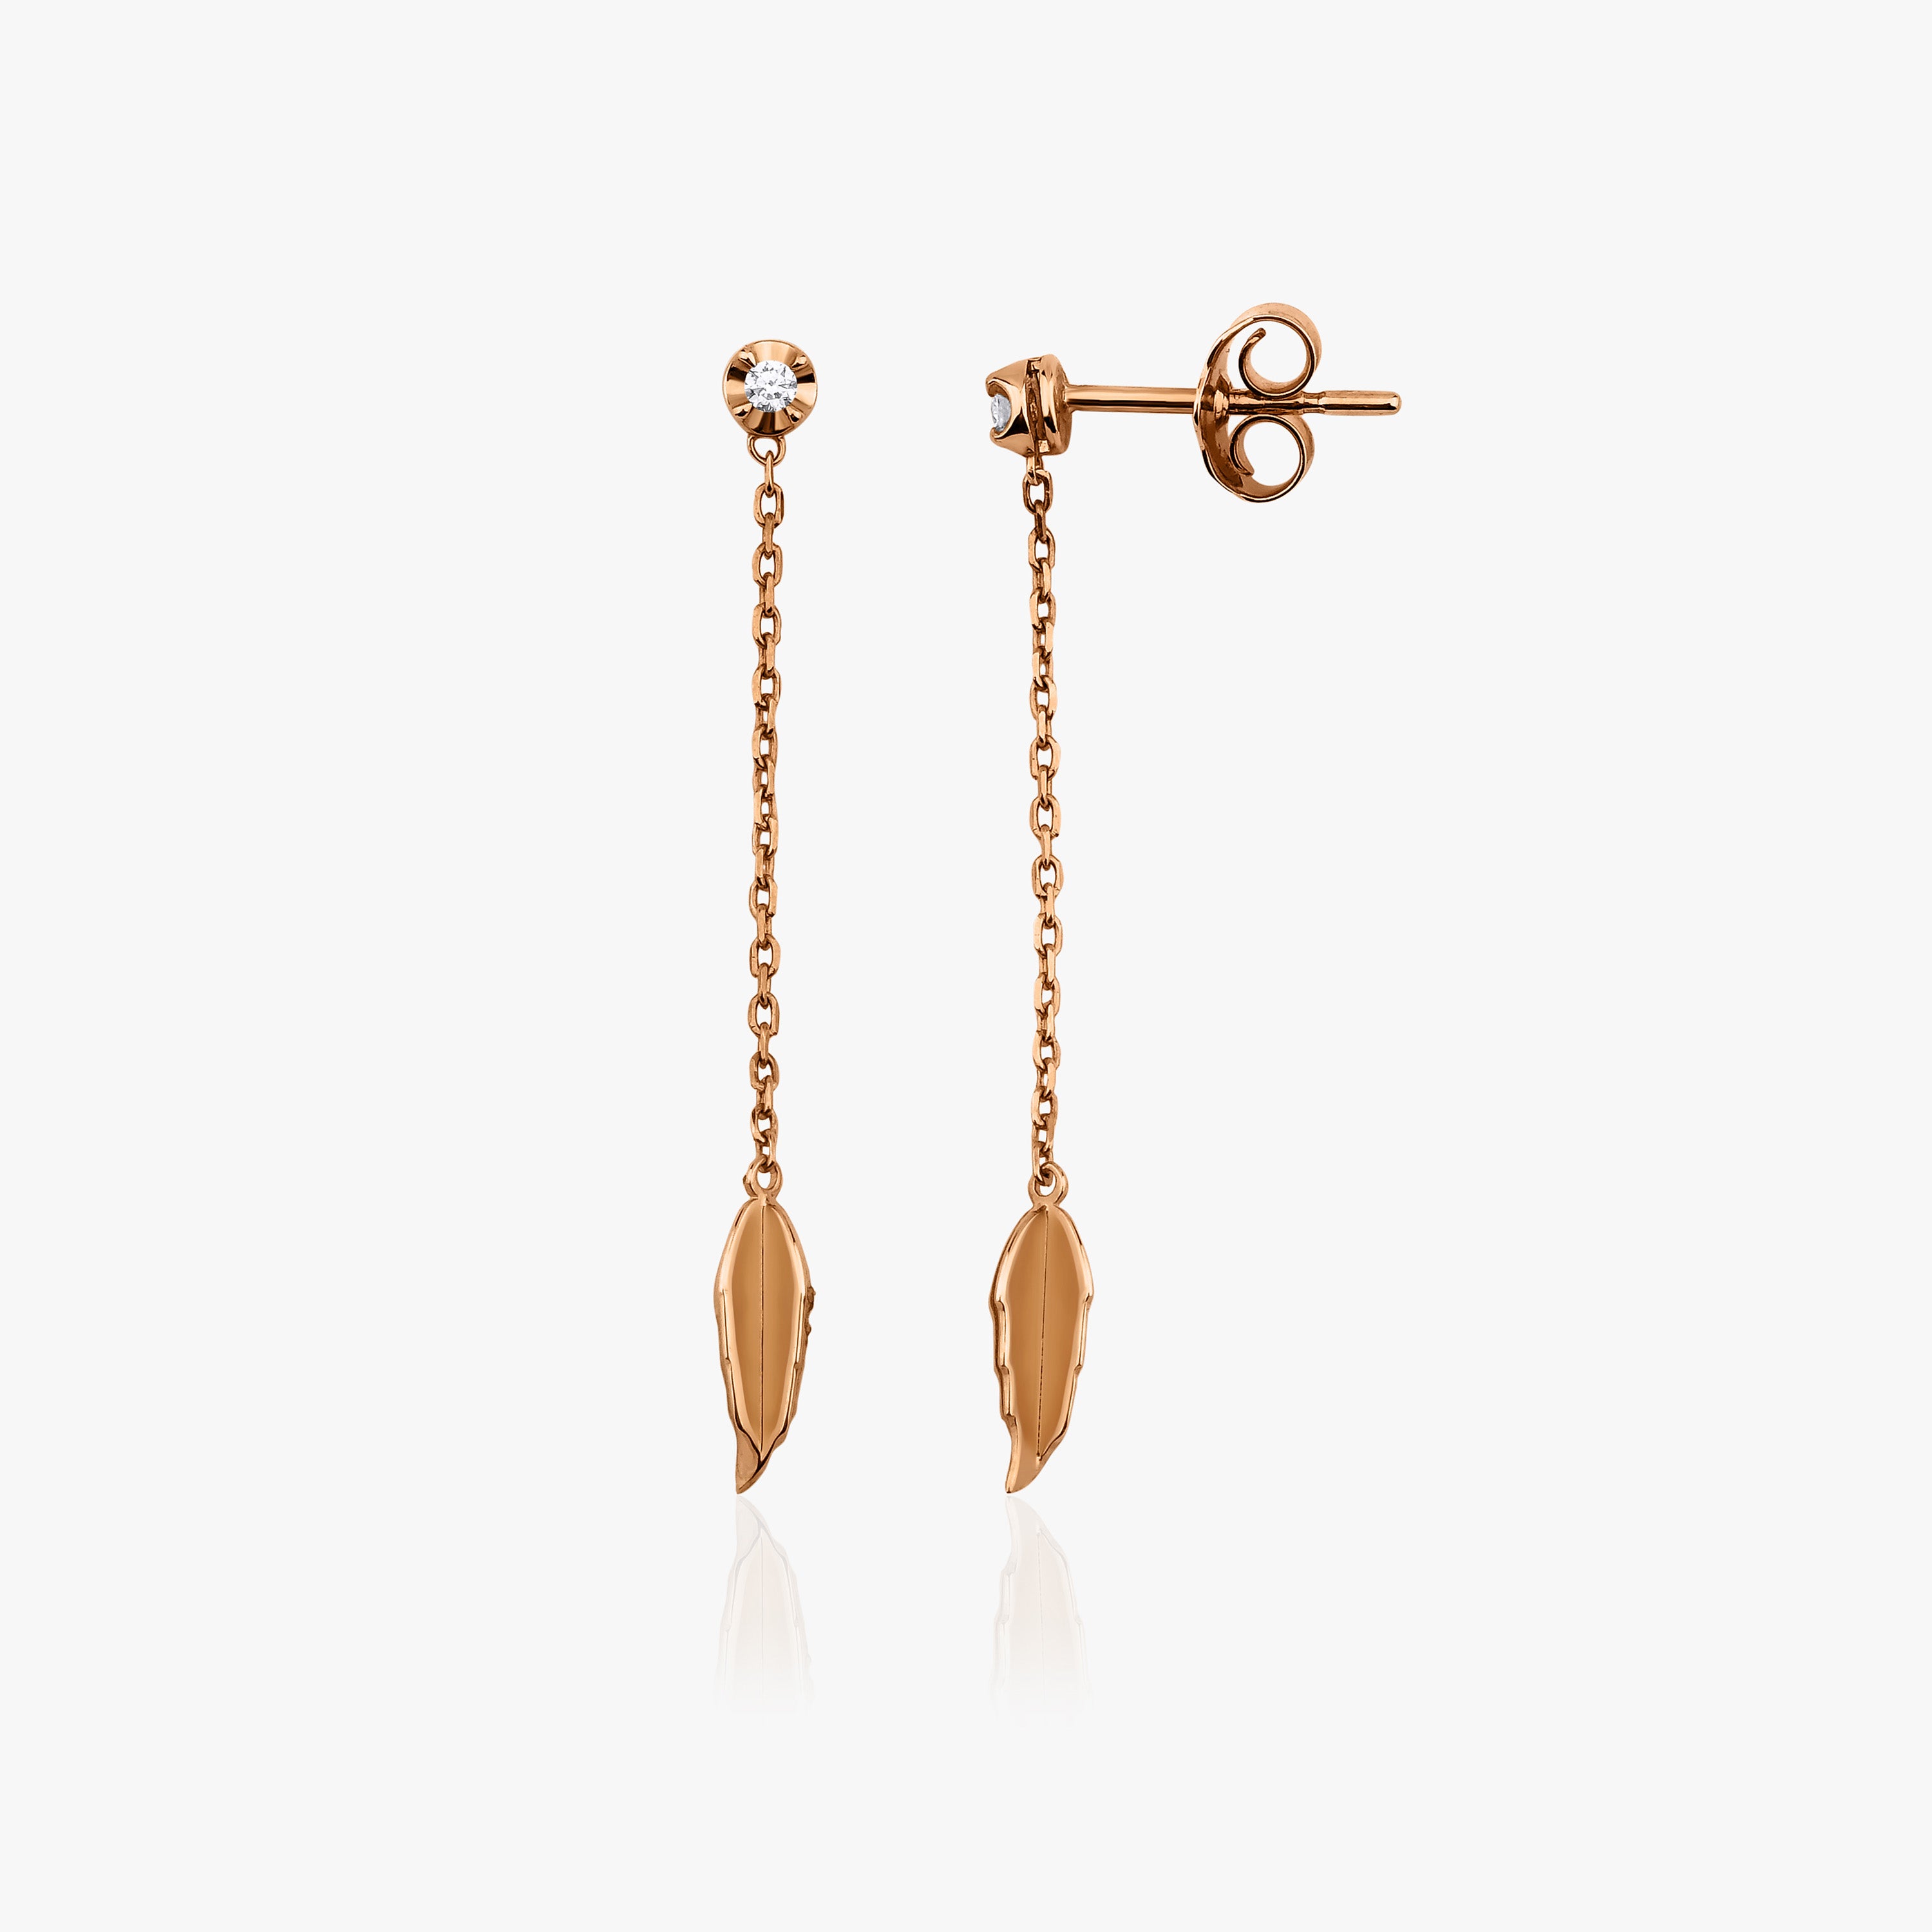 Mini Diamond Dangle Leaf Earrings Available in 14K and 18K Gold